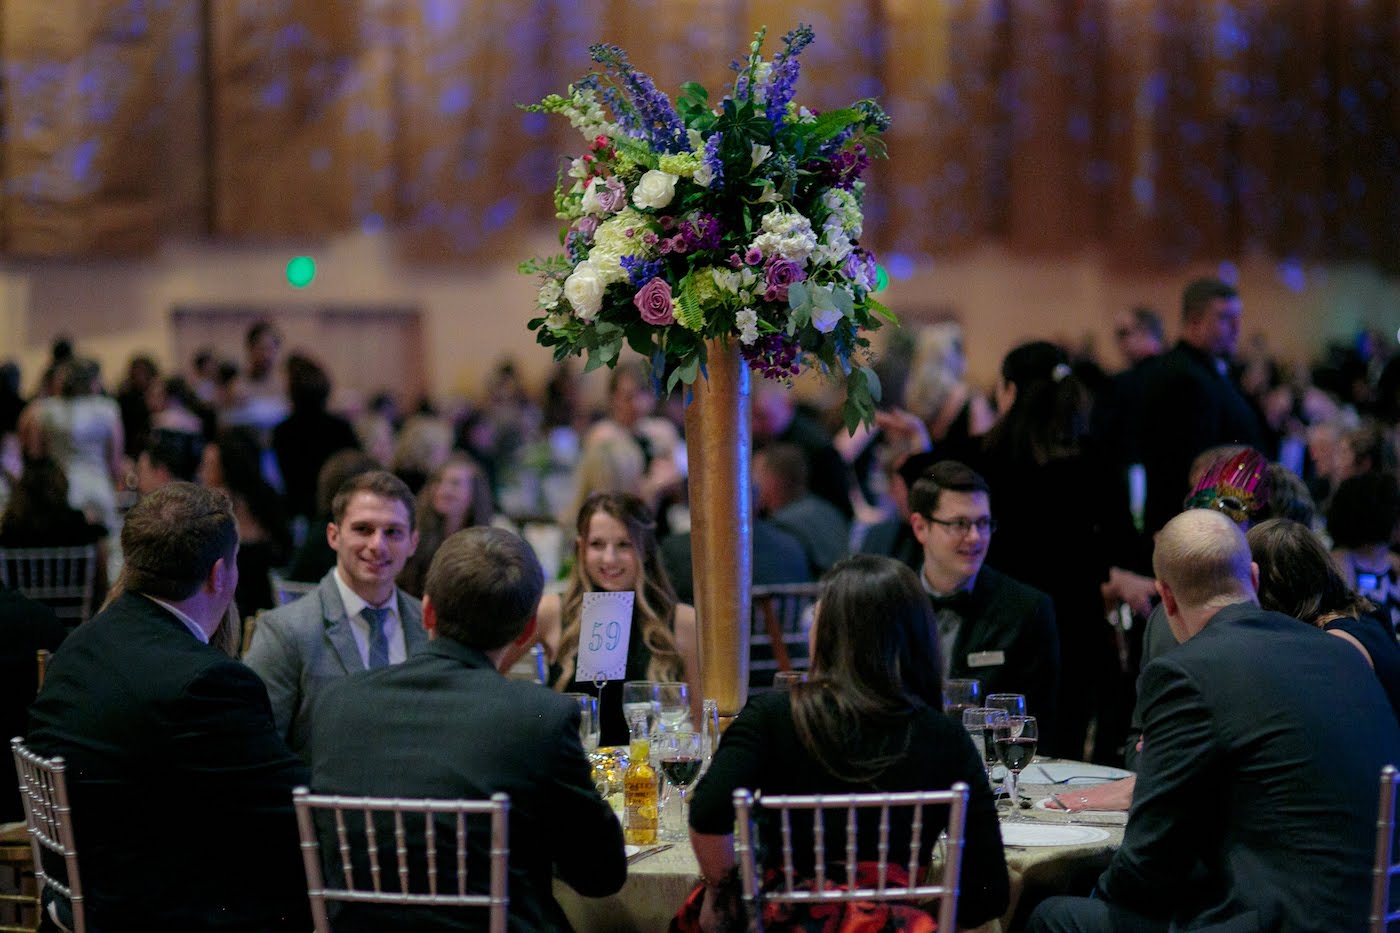 Floral arrangements by Yellow Canary Floral & Event Design with rose, hydrangea and dusty miller for Health Carousel Gala